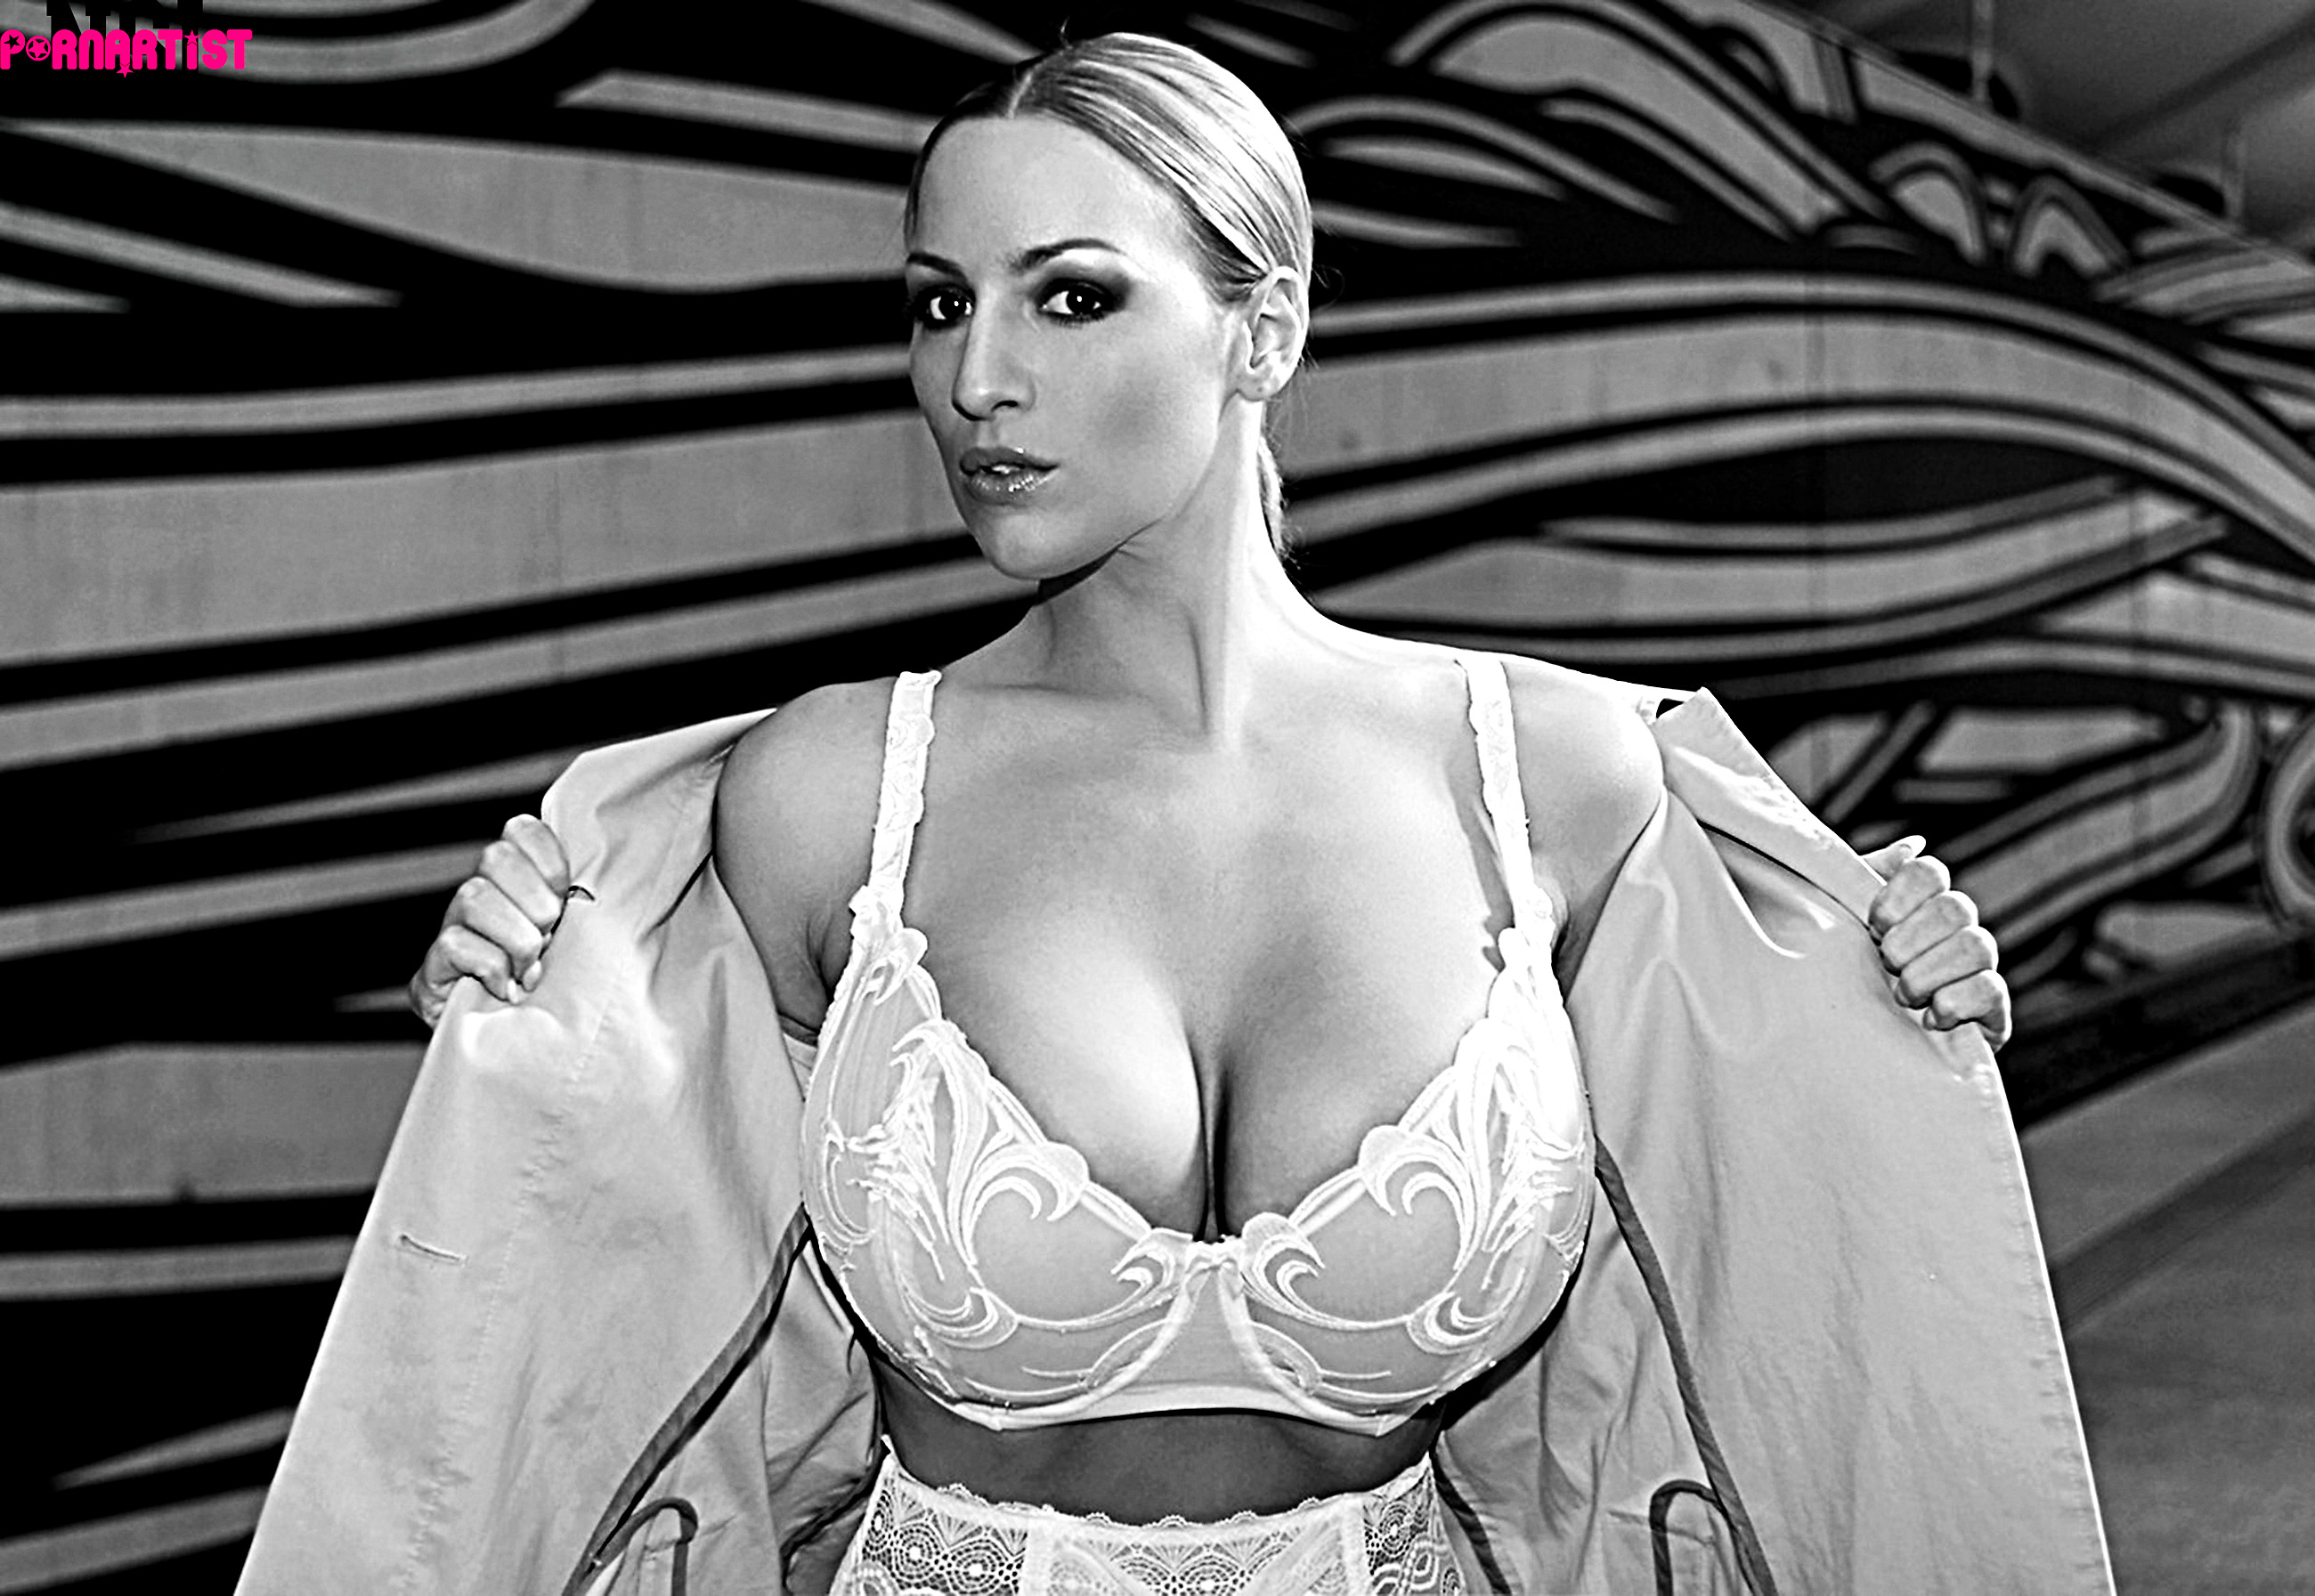 Black And White Huge Boobs - Jordan Carver busty big tits babe showing her bra in a black ...